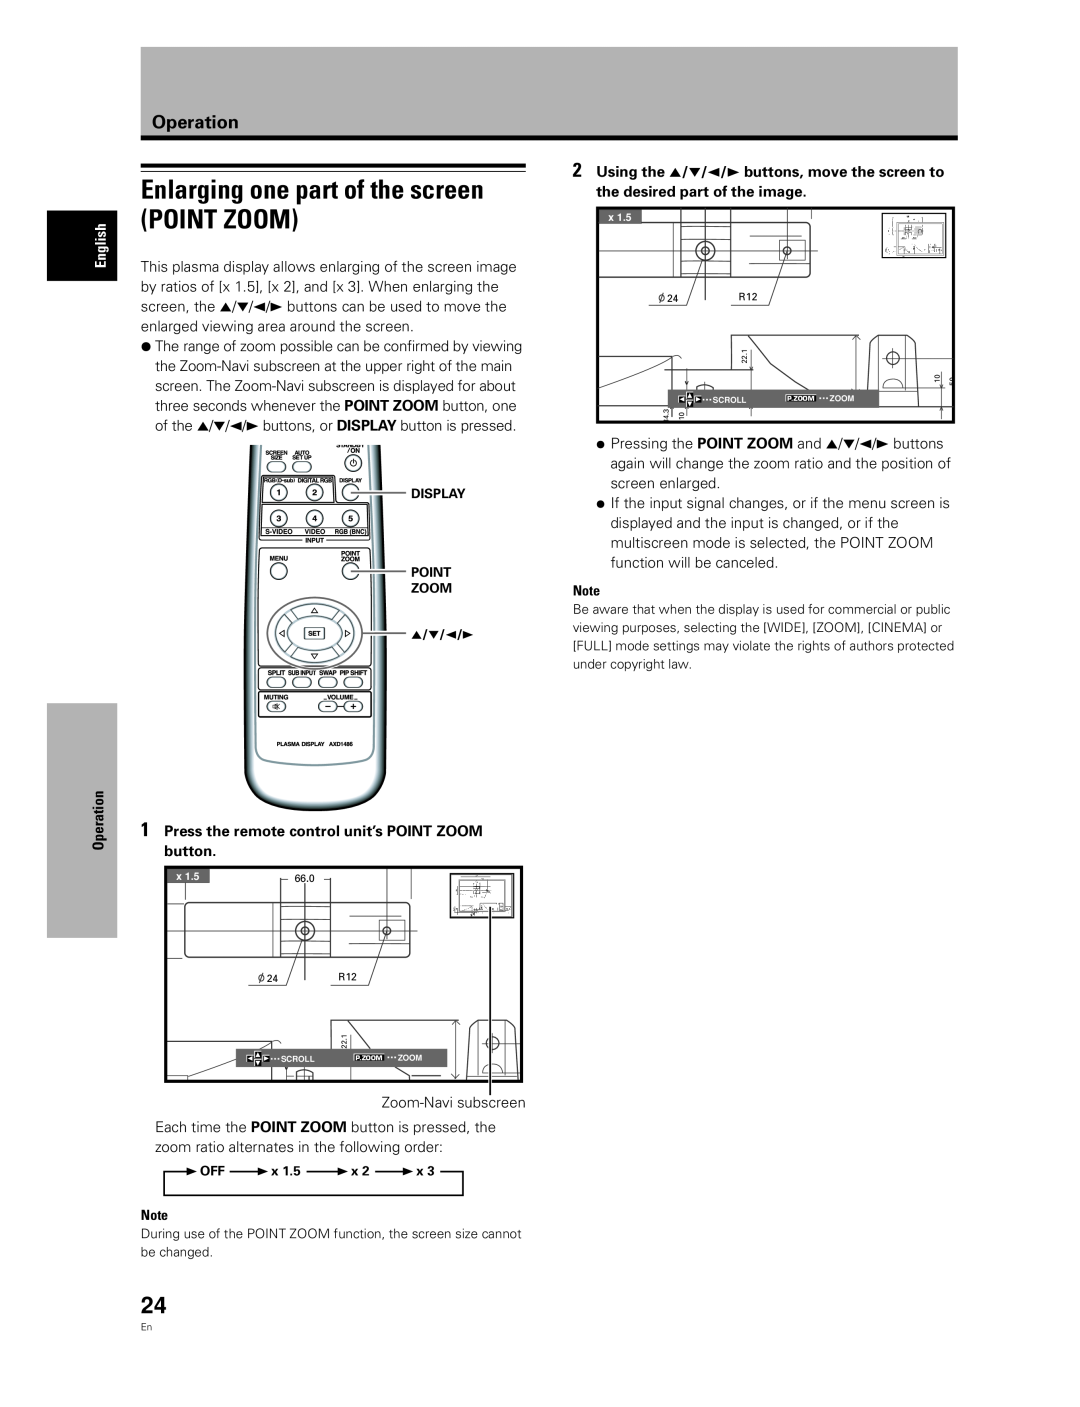 Pioneer PDA-5004 manual Enlarging one part of the screen POINT ZOOM, Operation, Press the remote control unit’s POINT ZOOM 